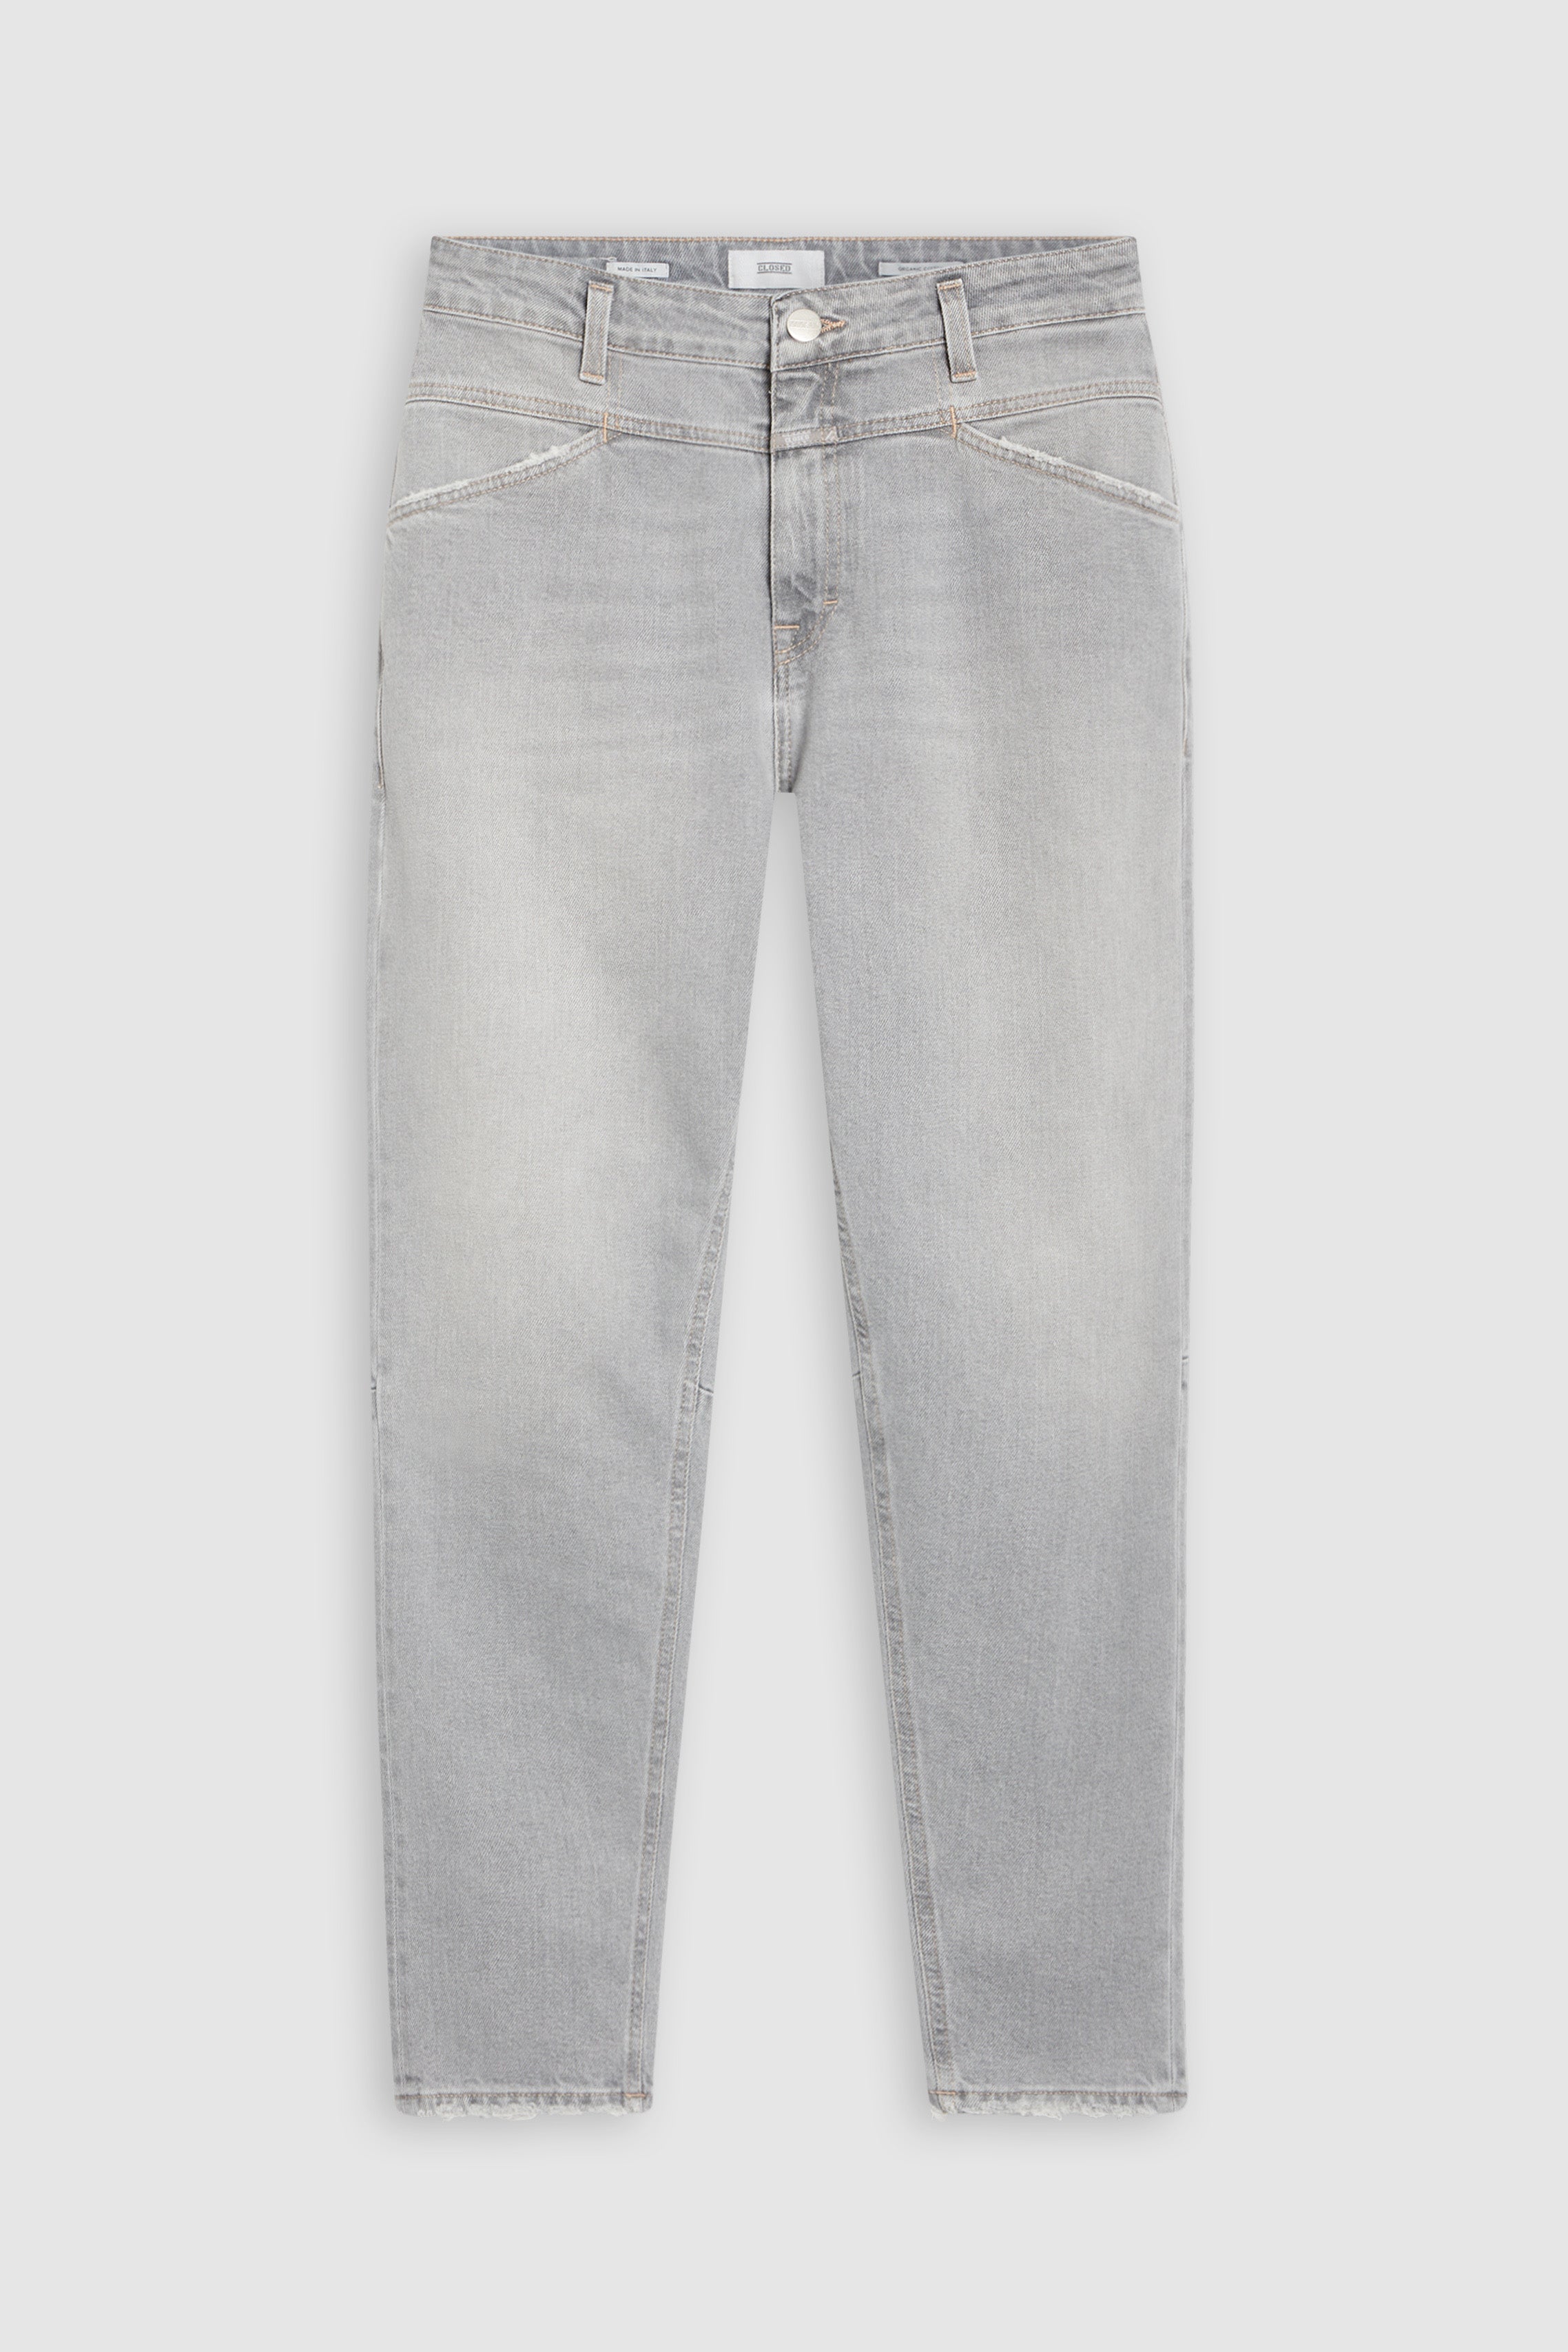 CLOSED-OUTLET-SALE-STYLE-NAME-X-LENT-JEANS-Hosen-ARCHIVE-COLLECTION-3.jpg